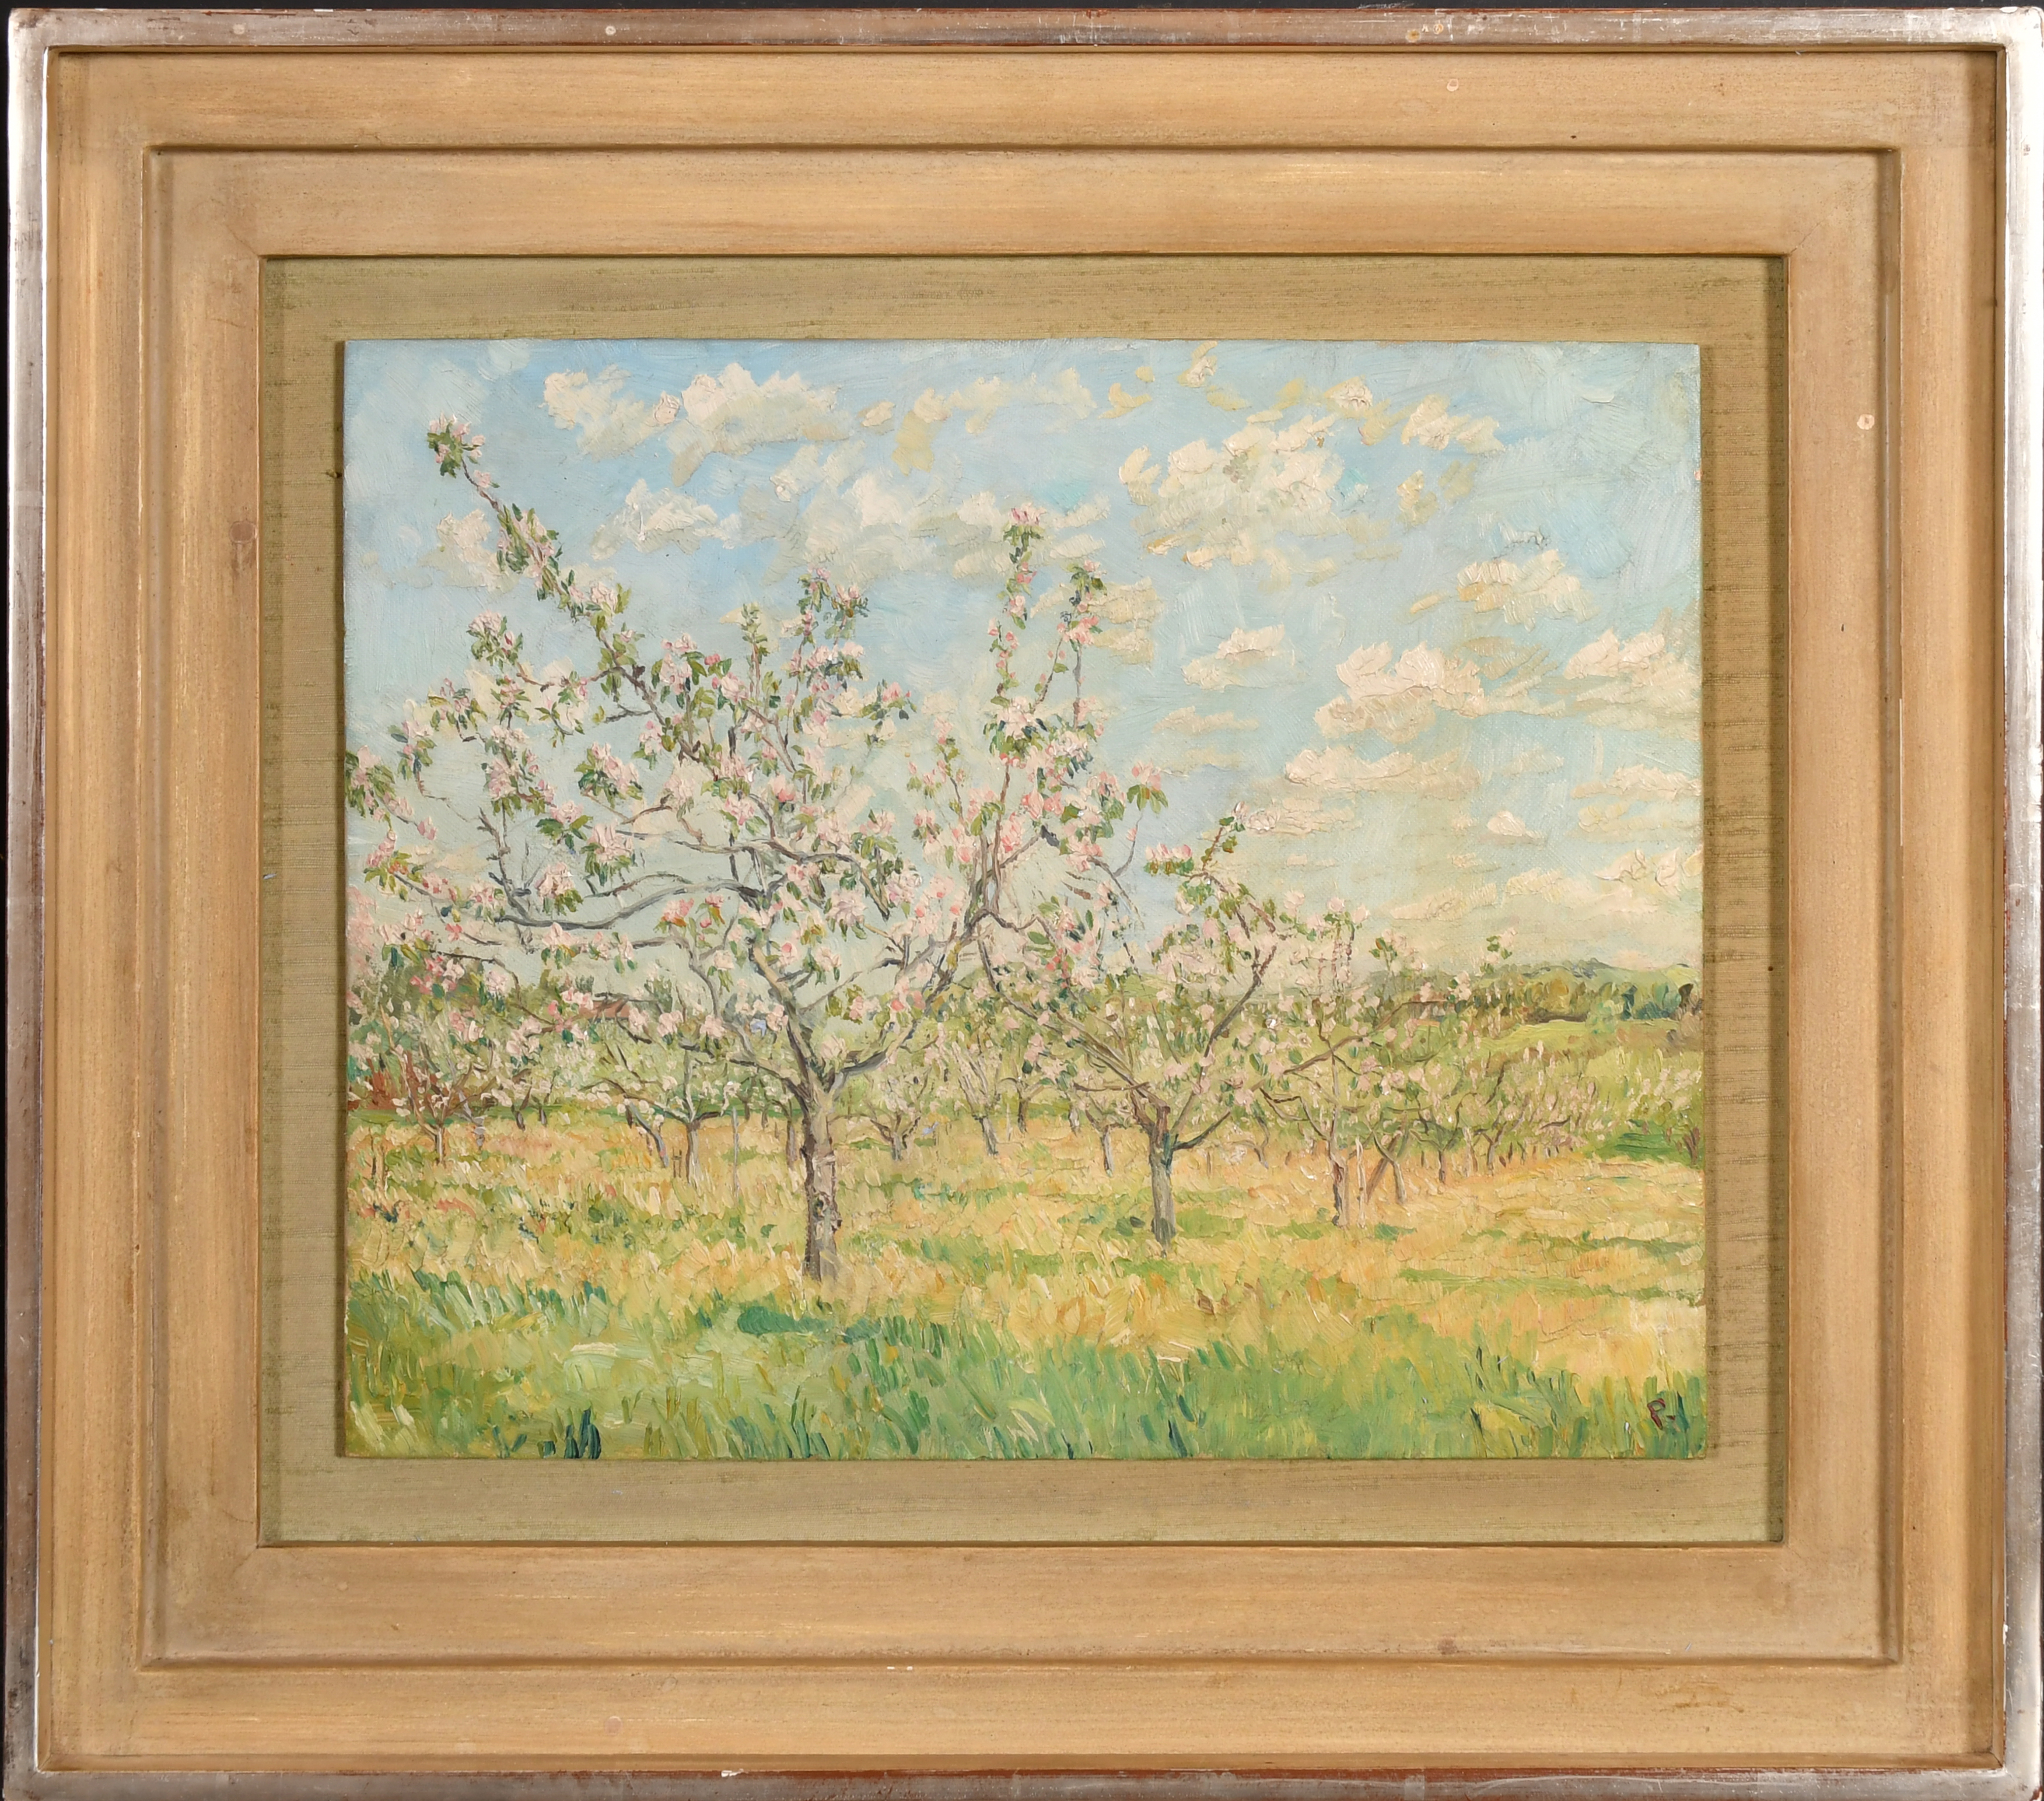 Early 20th Century English School. Apple Blossom, Oil on board, Signed with initial 'P', and - Image 2 of 5